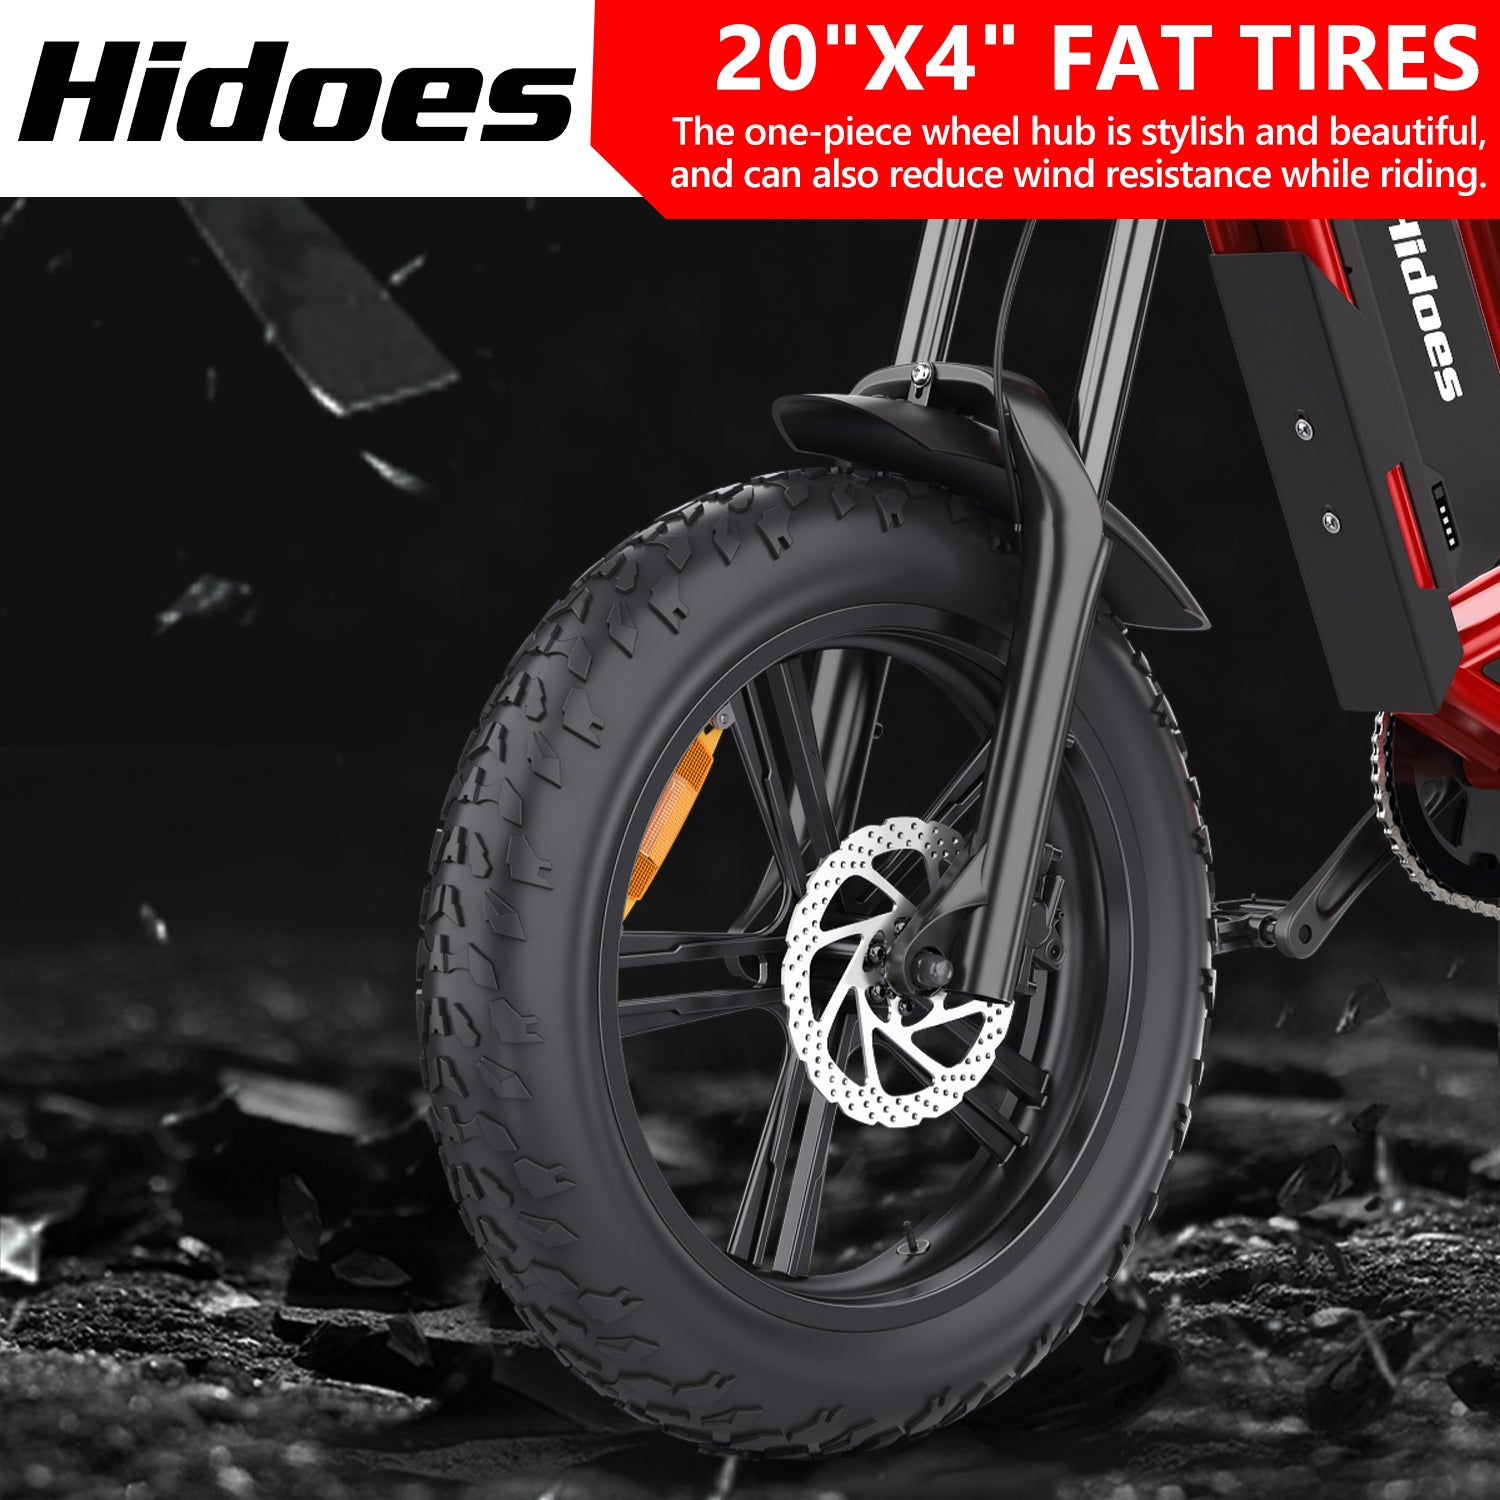 Hidoes B6 fat tire electric bike with 20" x4" wide tires